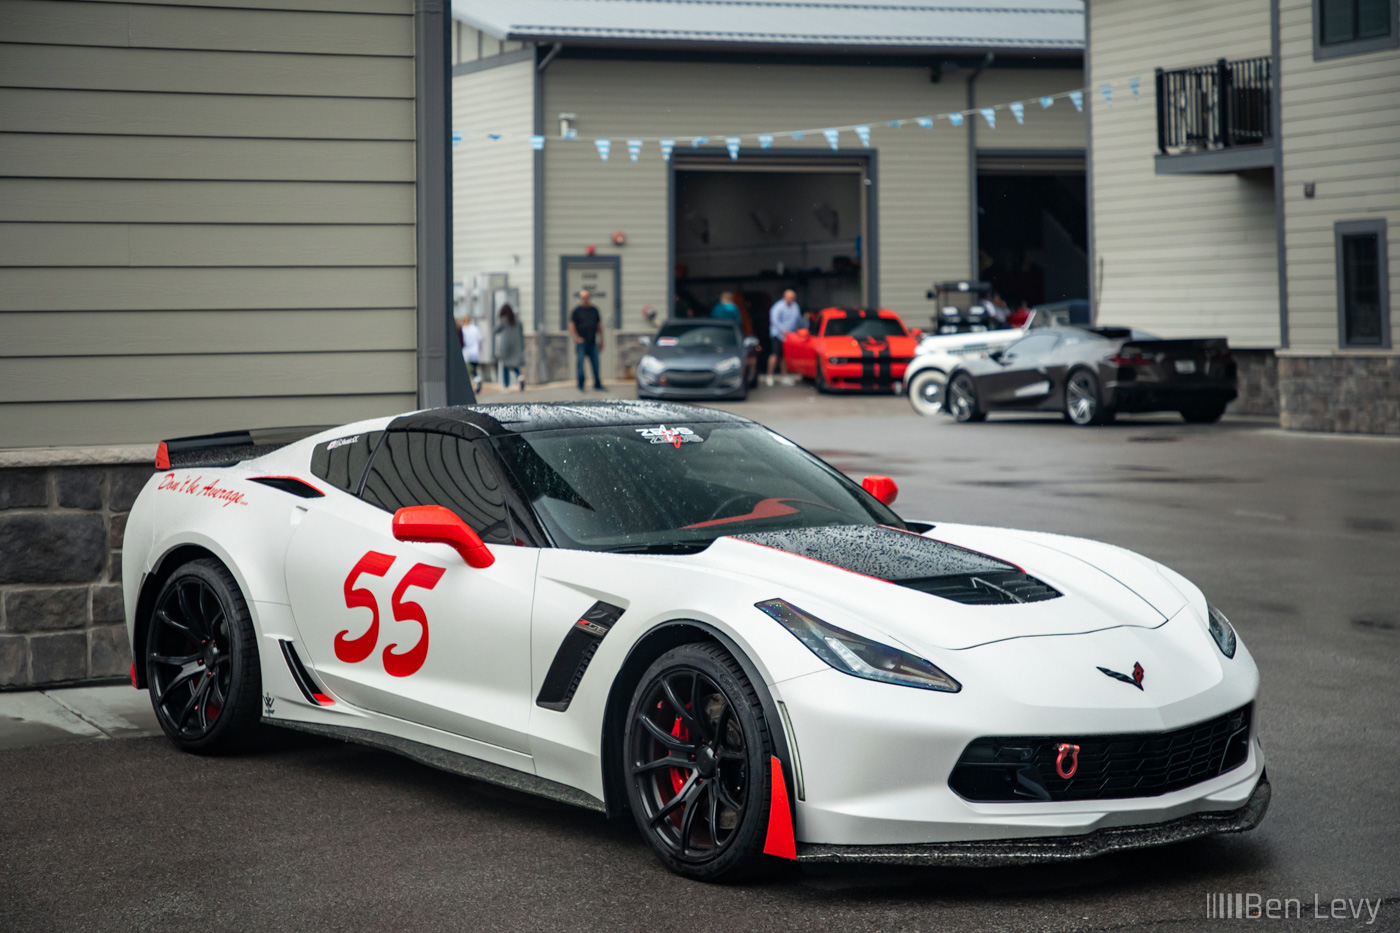 White Z06 Corvette with Number "55"